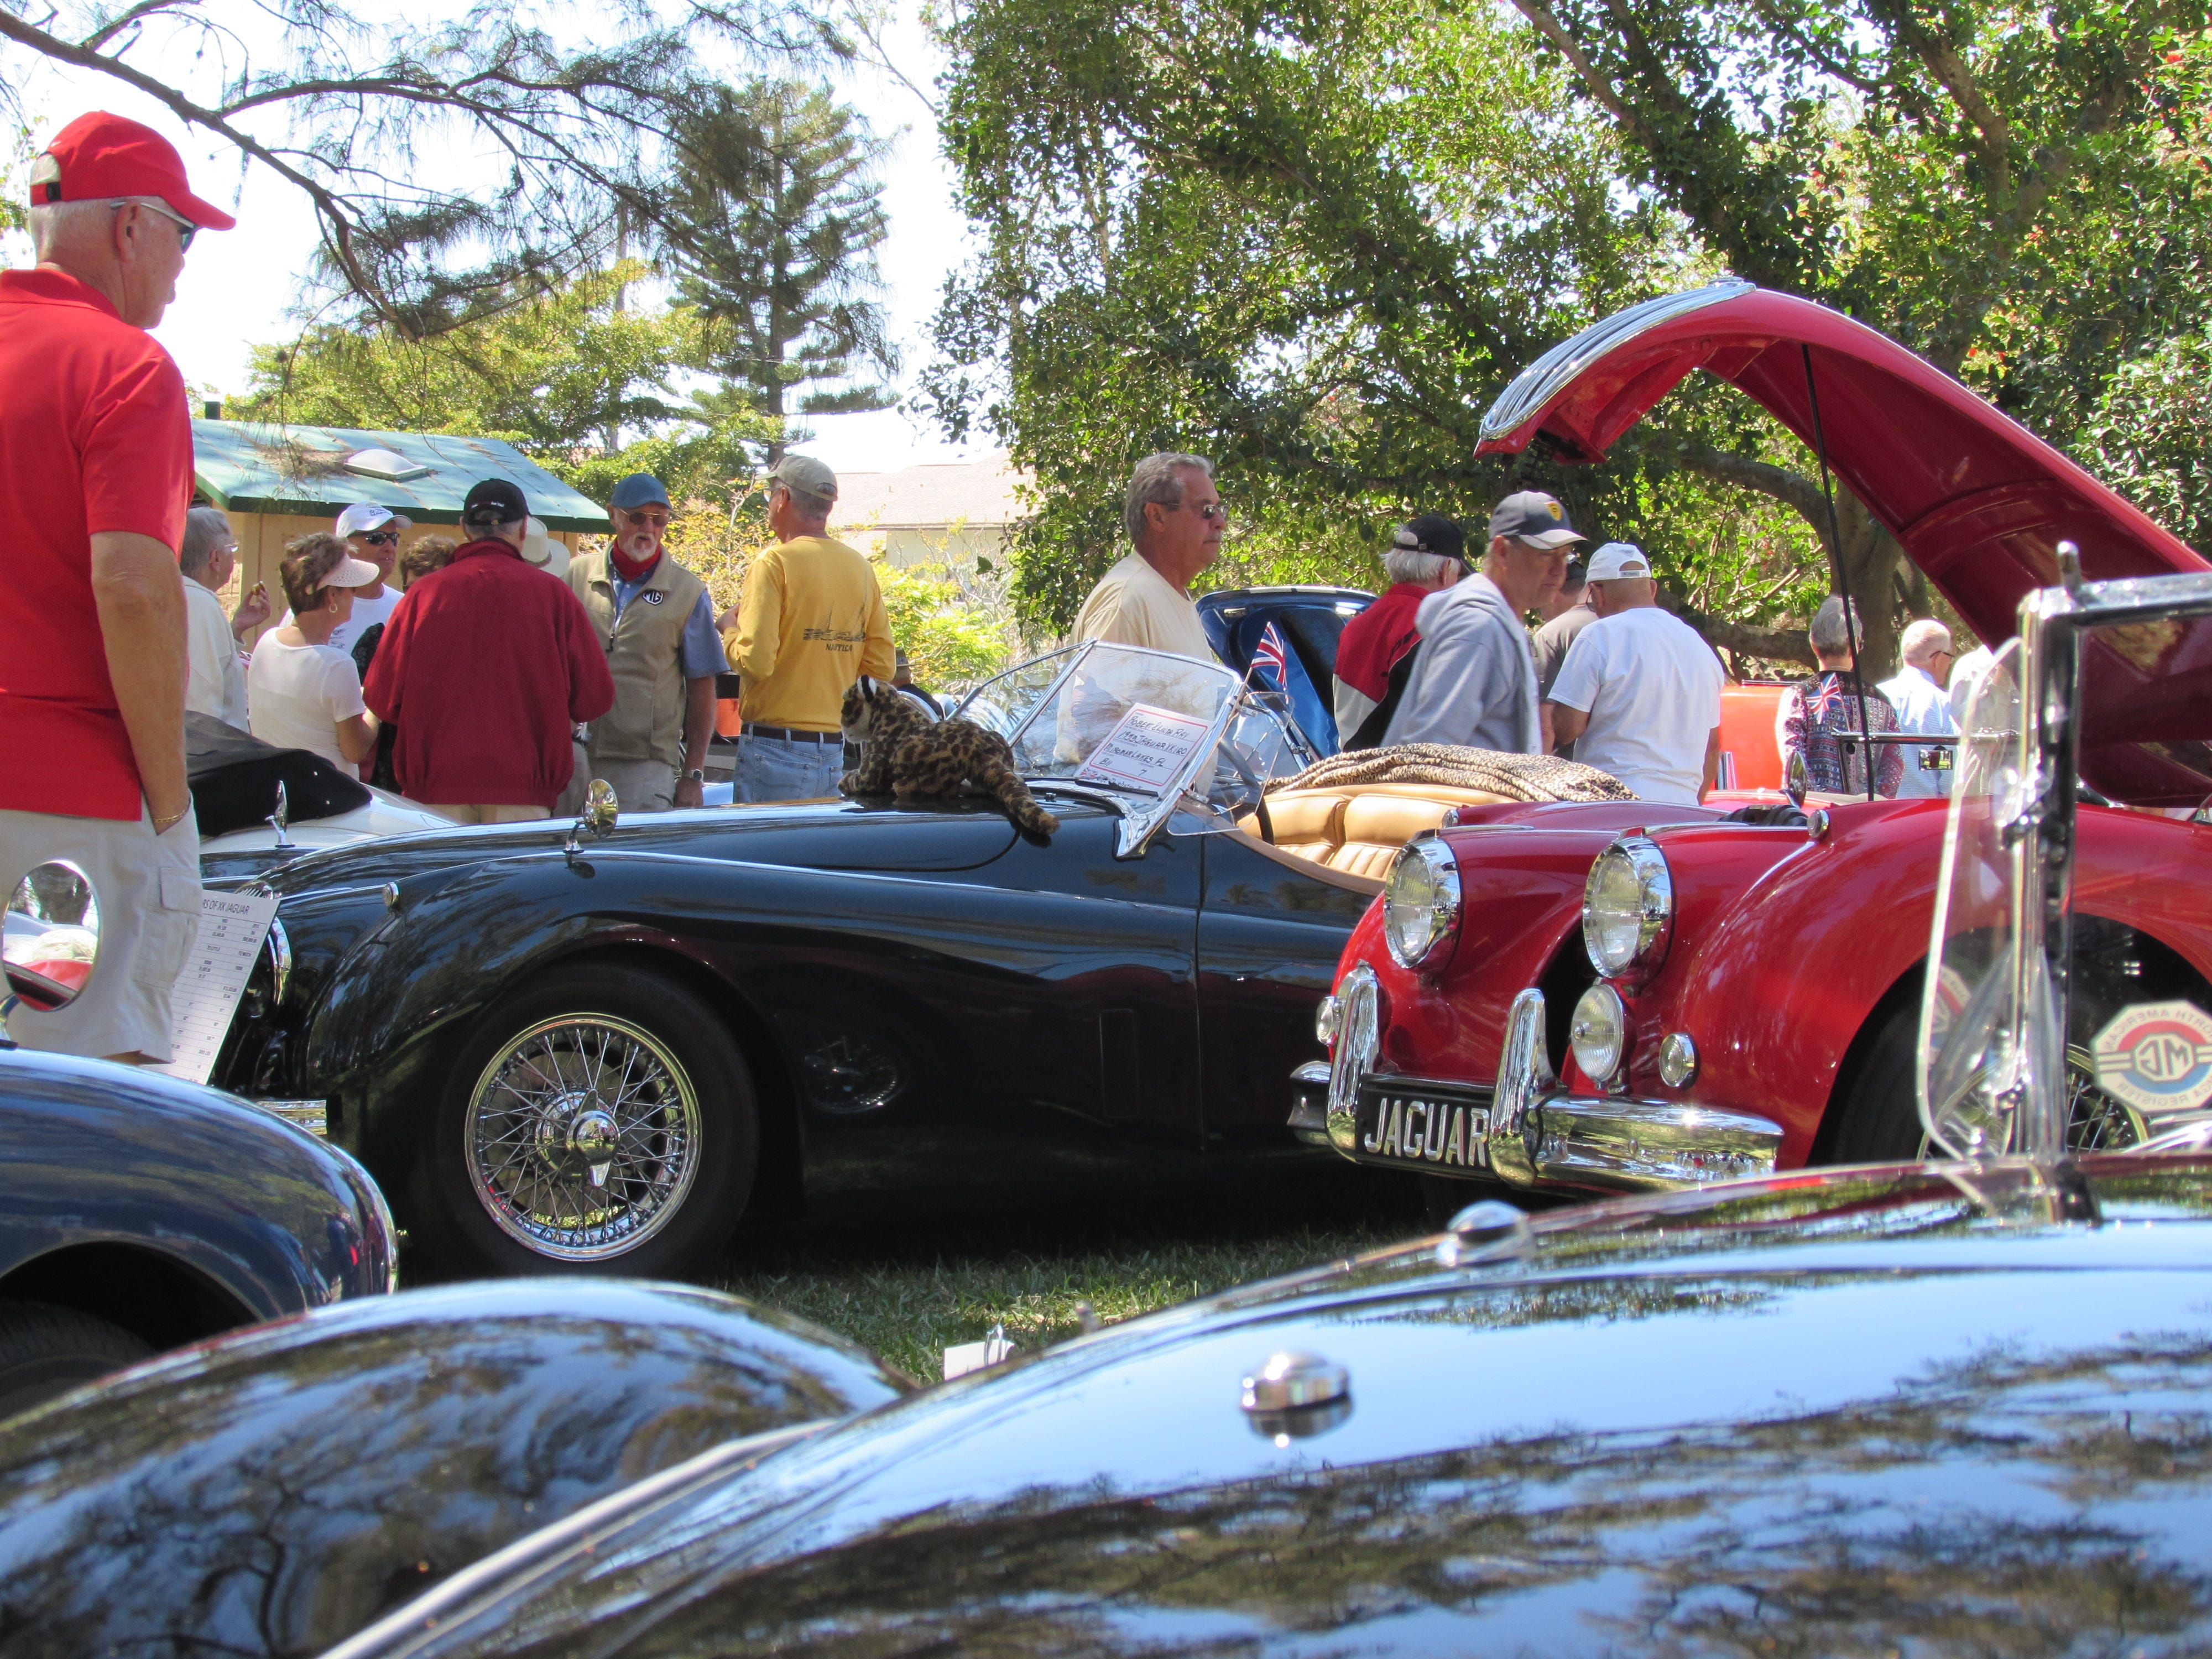 Popular Antique car enthusiasts retirement community with Best Inspiration